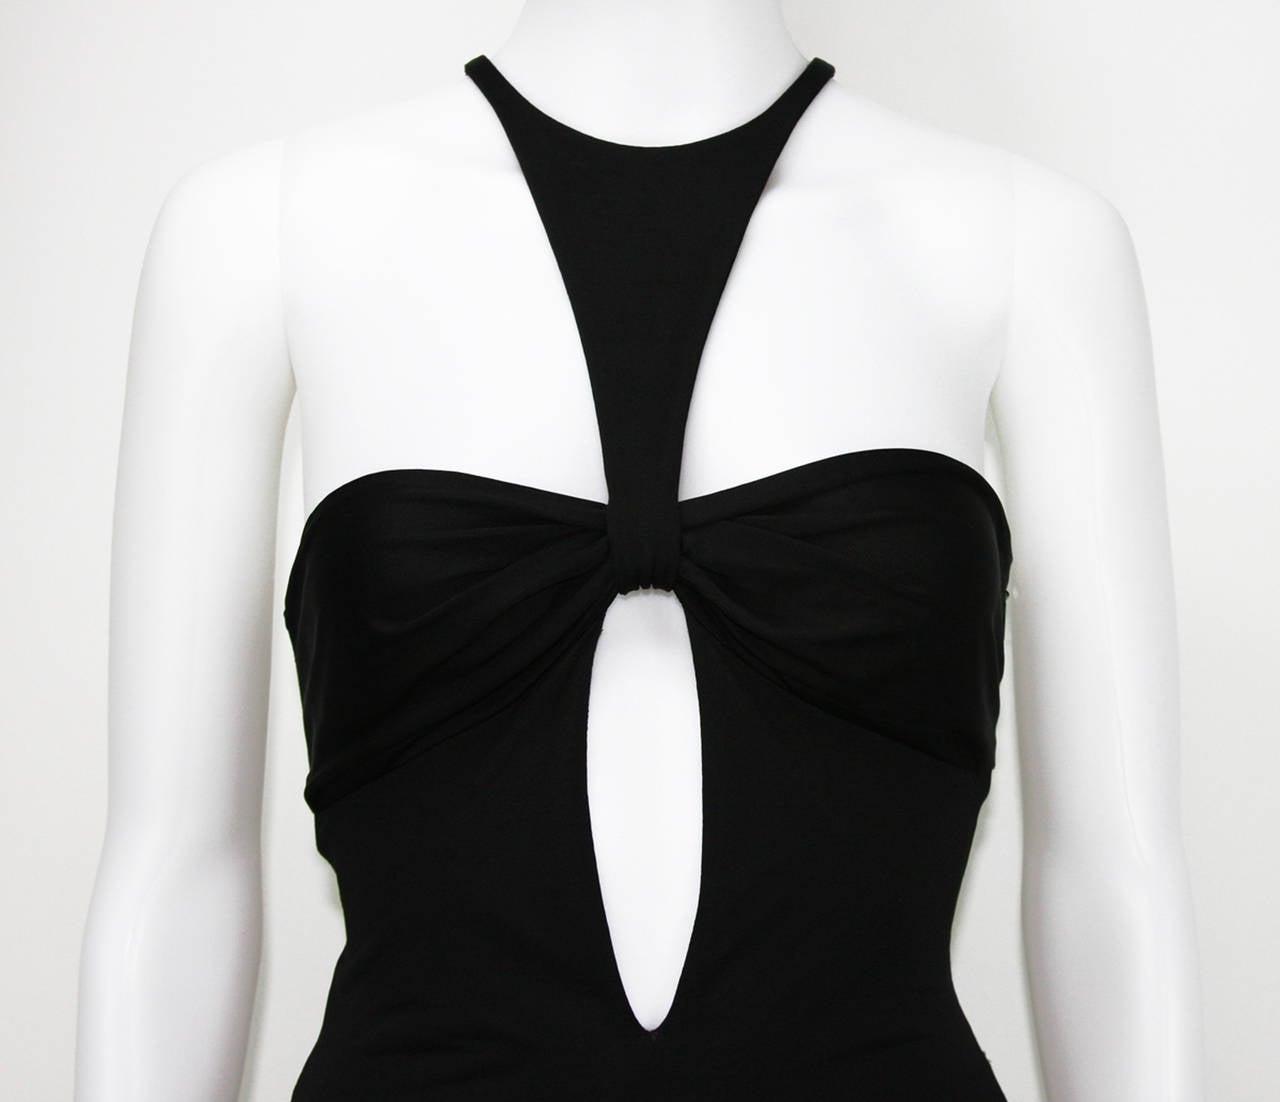 TOM FORD for GUCCI BLACK JERSEY DRESS GOWN

TOM FORD'S FINAL COLLECTION FOR GUCCI – FALL/WINTER 2004
THE WHITE, BEADED VERSION OF THIS DRESS WAS WORN BY ROBIN WRIGHT AT THE CANNES FILM FESTIVAL IN 2004
ITALIAN SIZE 40
COLOR – BLACK
JERSEY